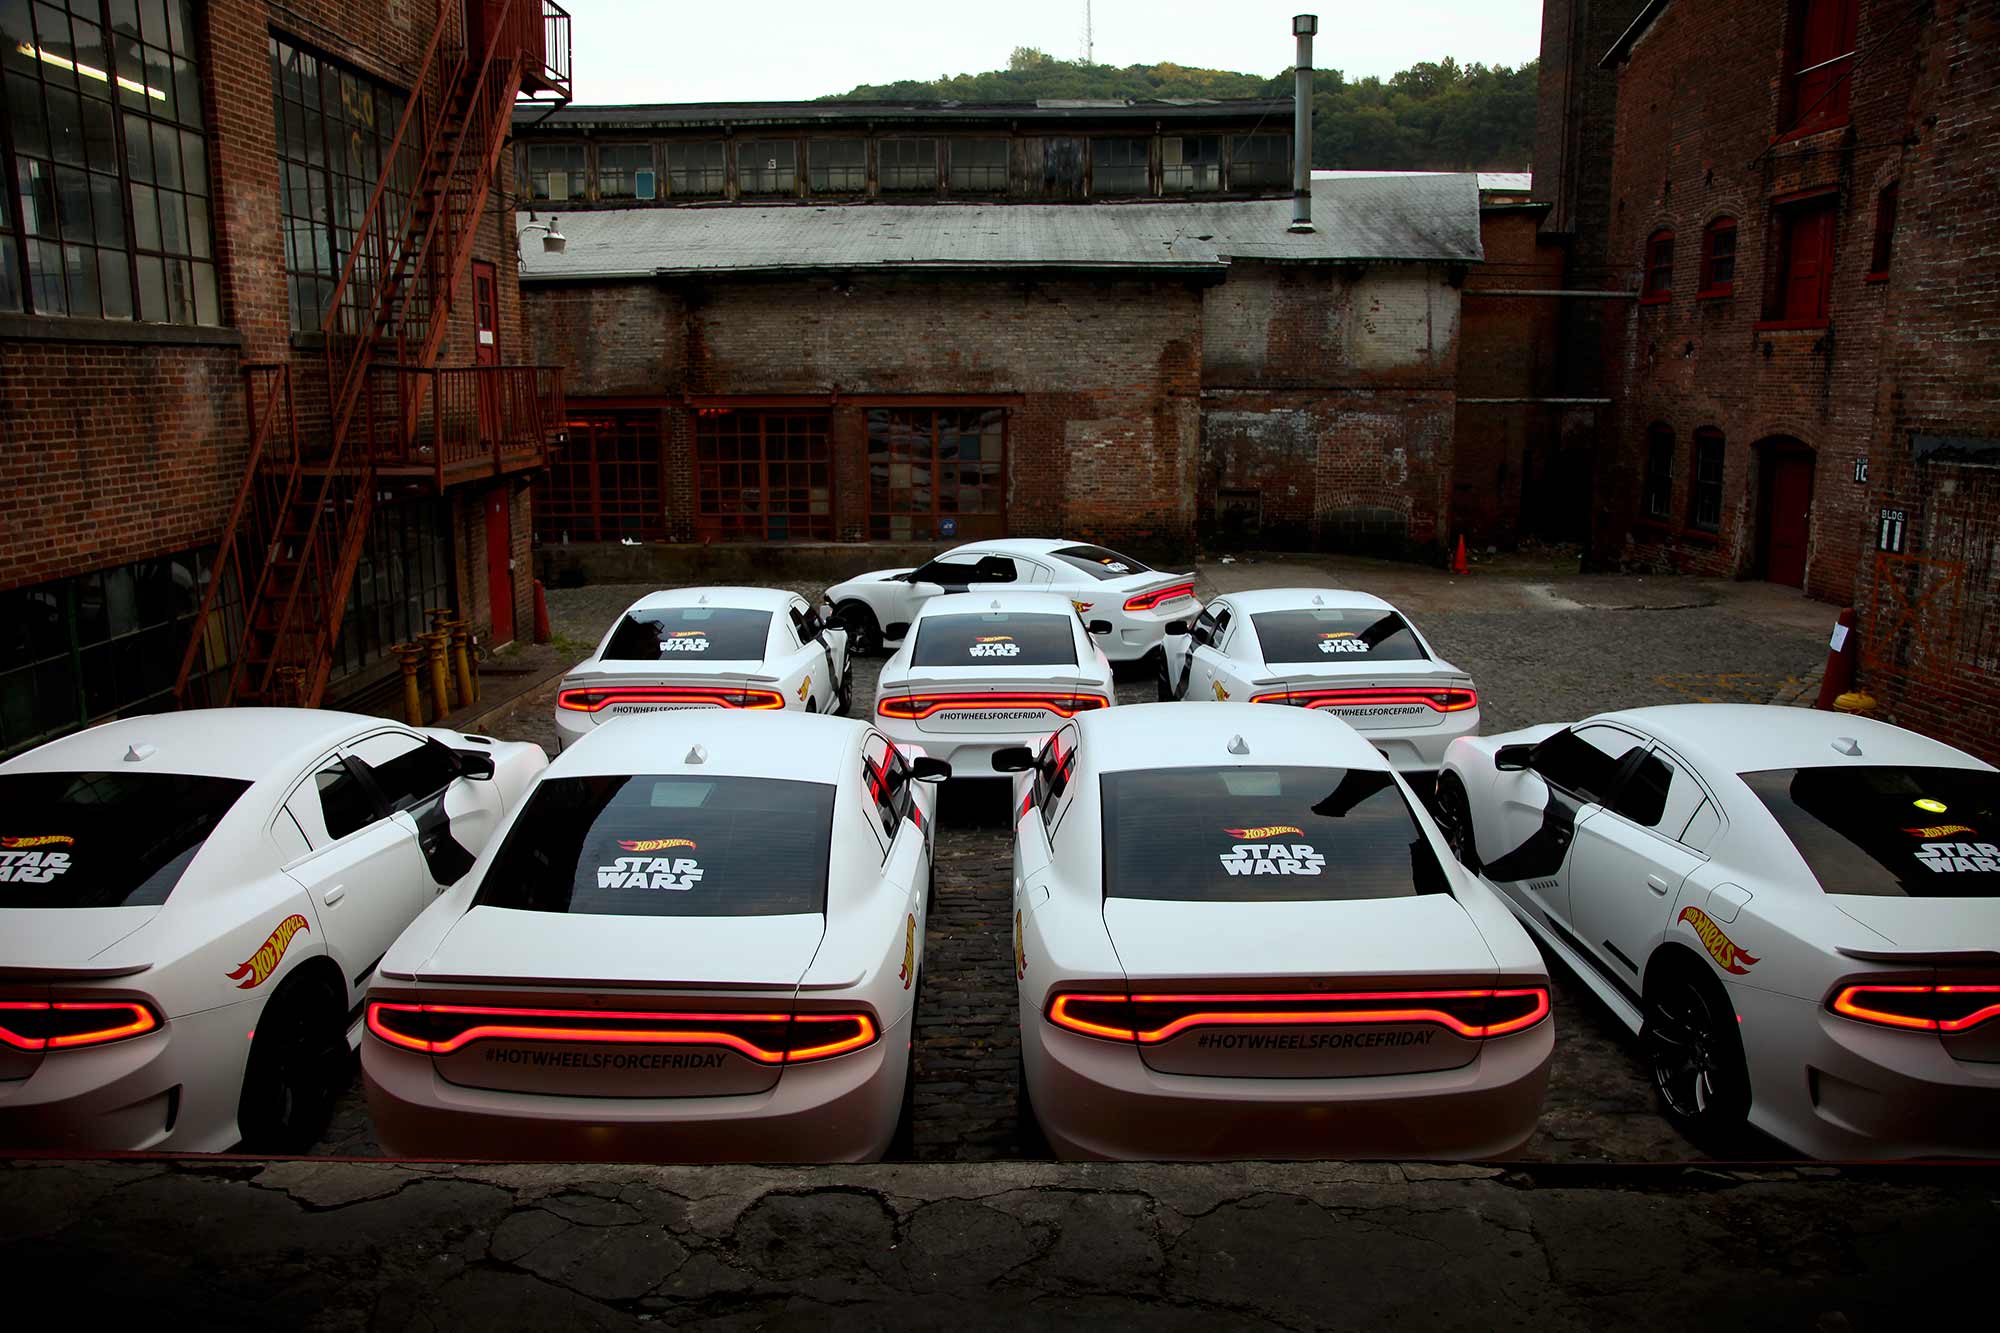 The full fleet of Stormtrooper Dodge SRT's were quite a sight on Hot Wheels Force Friday.